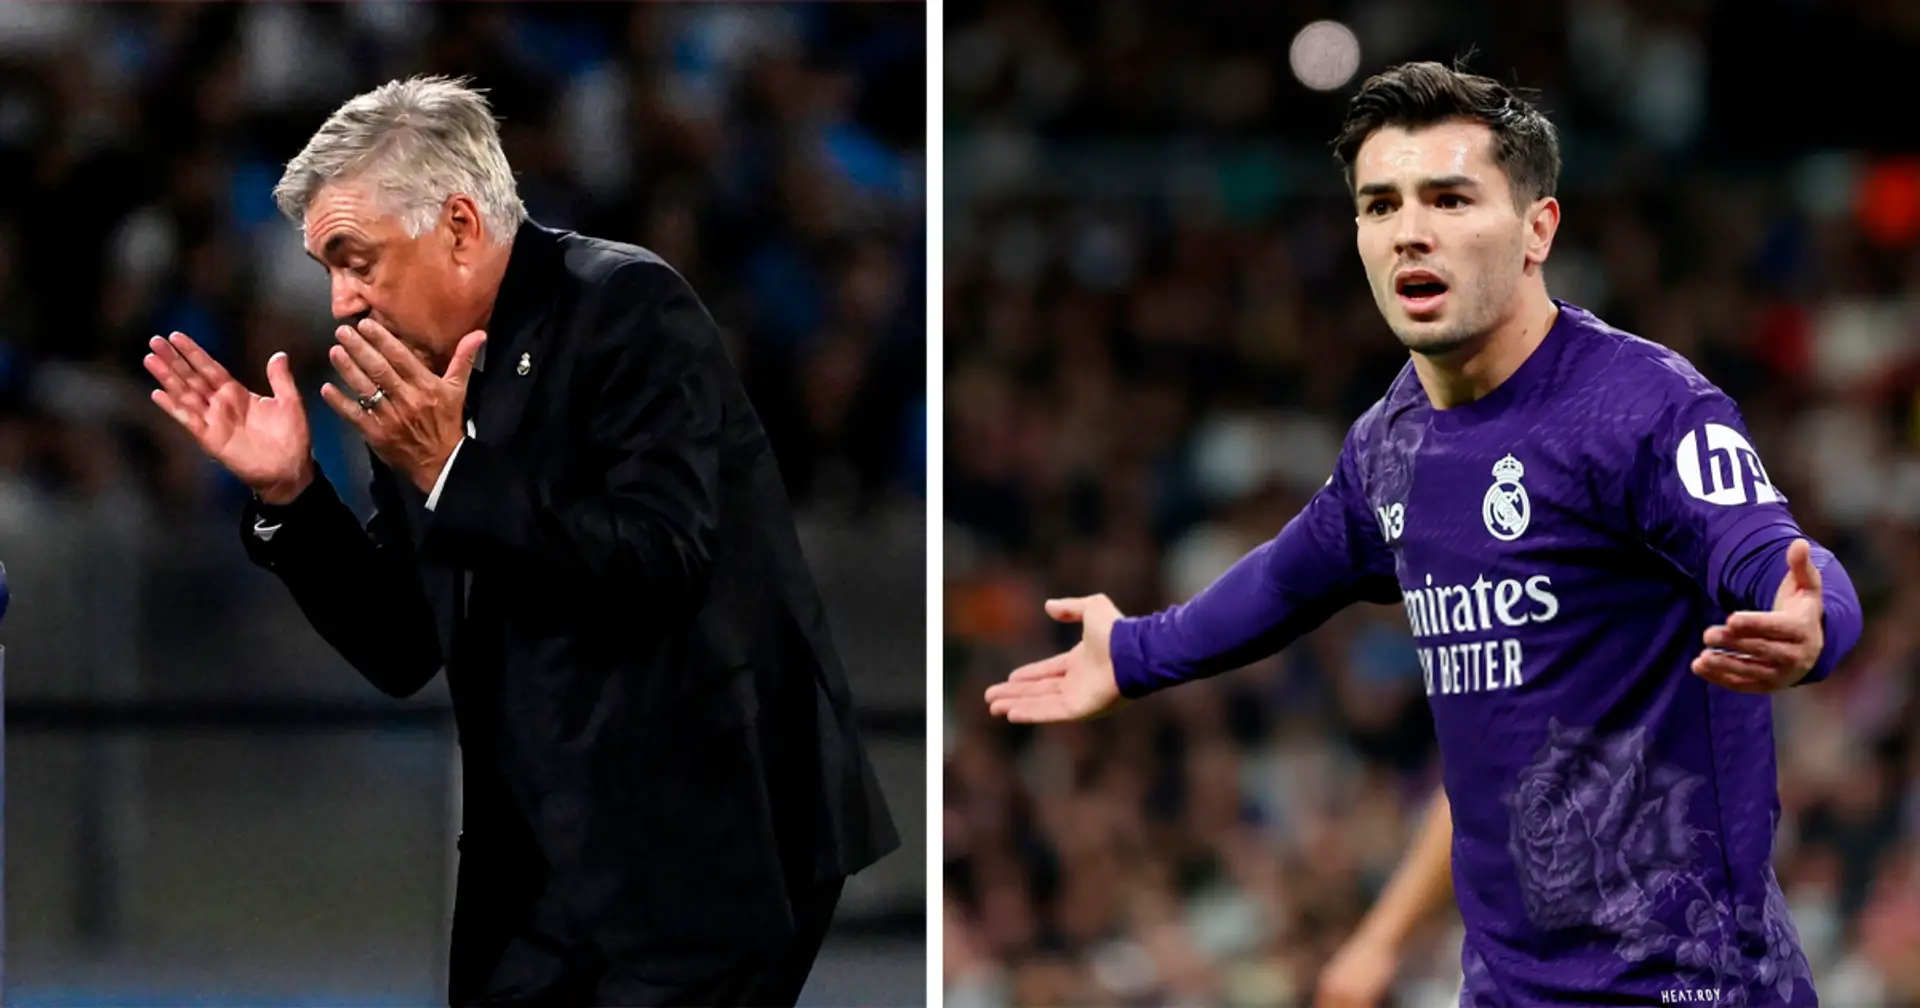 'Imagine the Man City press': fans are terrified with Real Madrid performance prior to Champions League quarterfinals